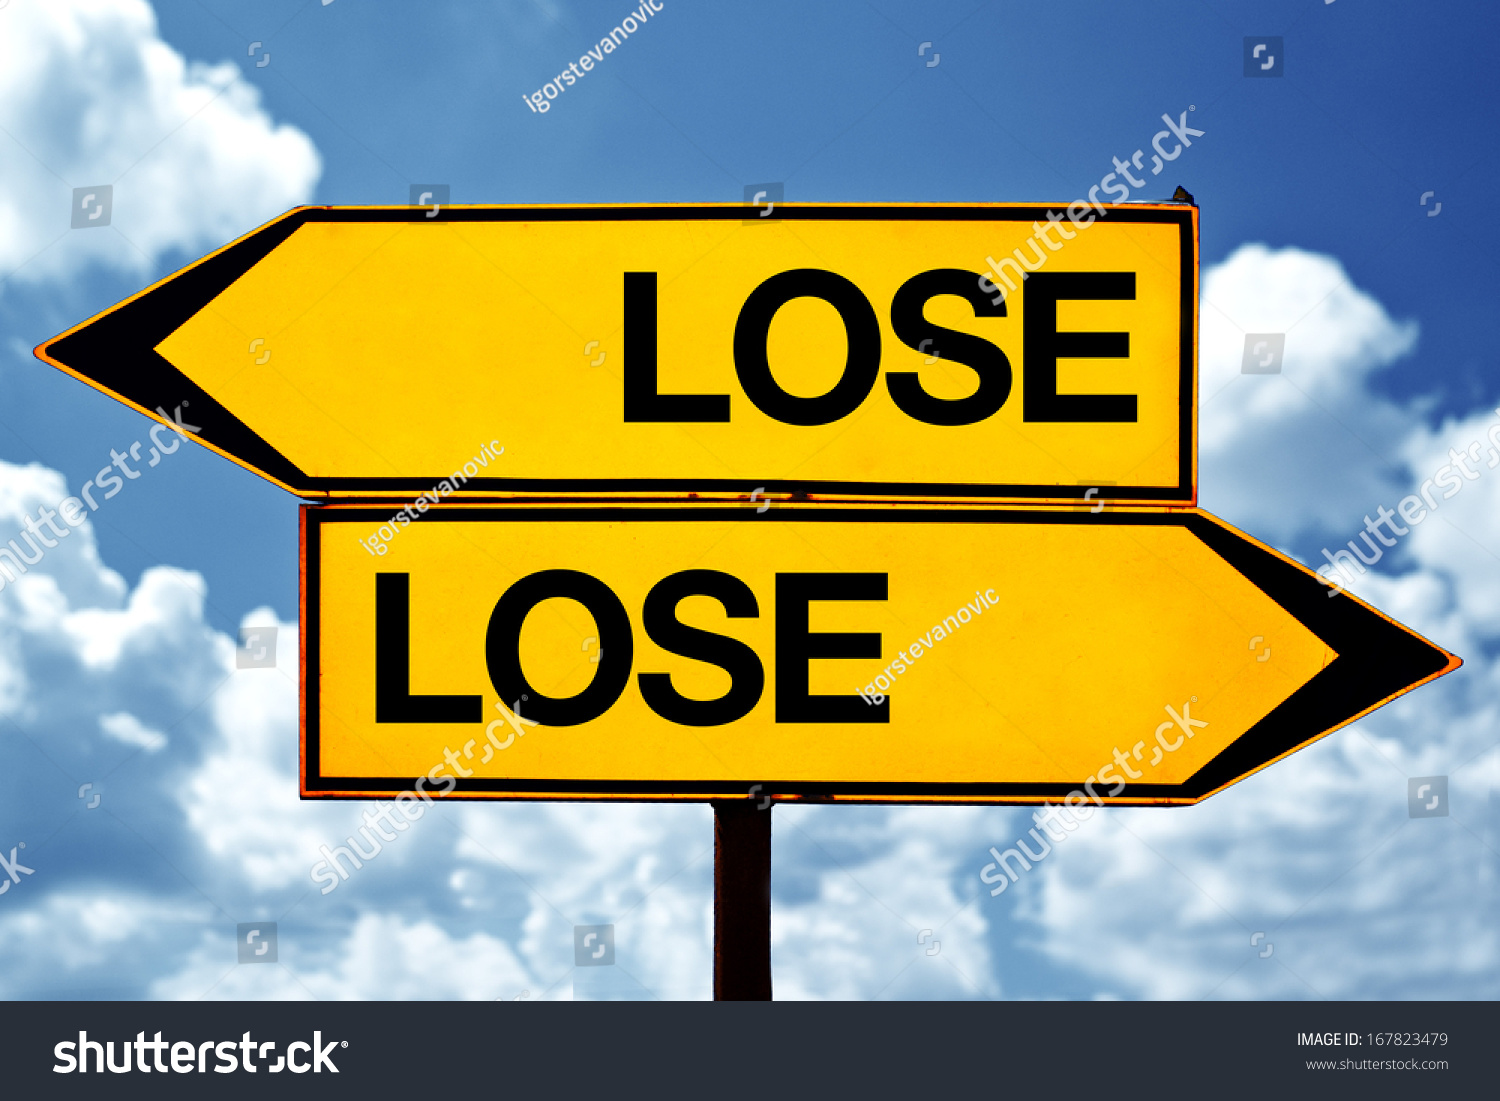 Lose Lose Situation Opposite Signs Two Stock Photo ...